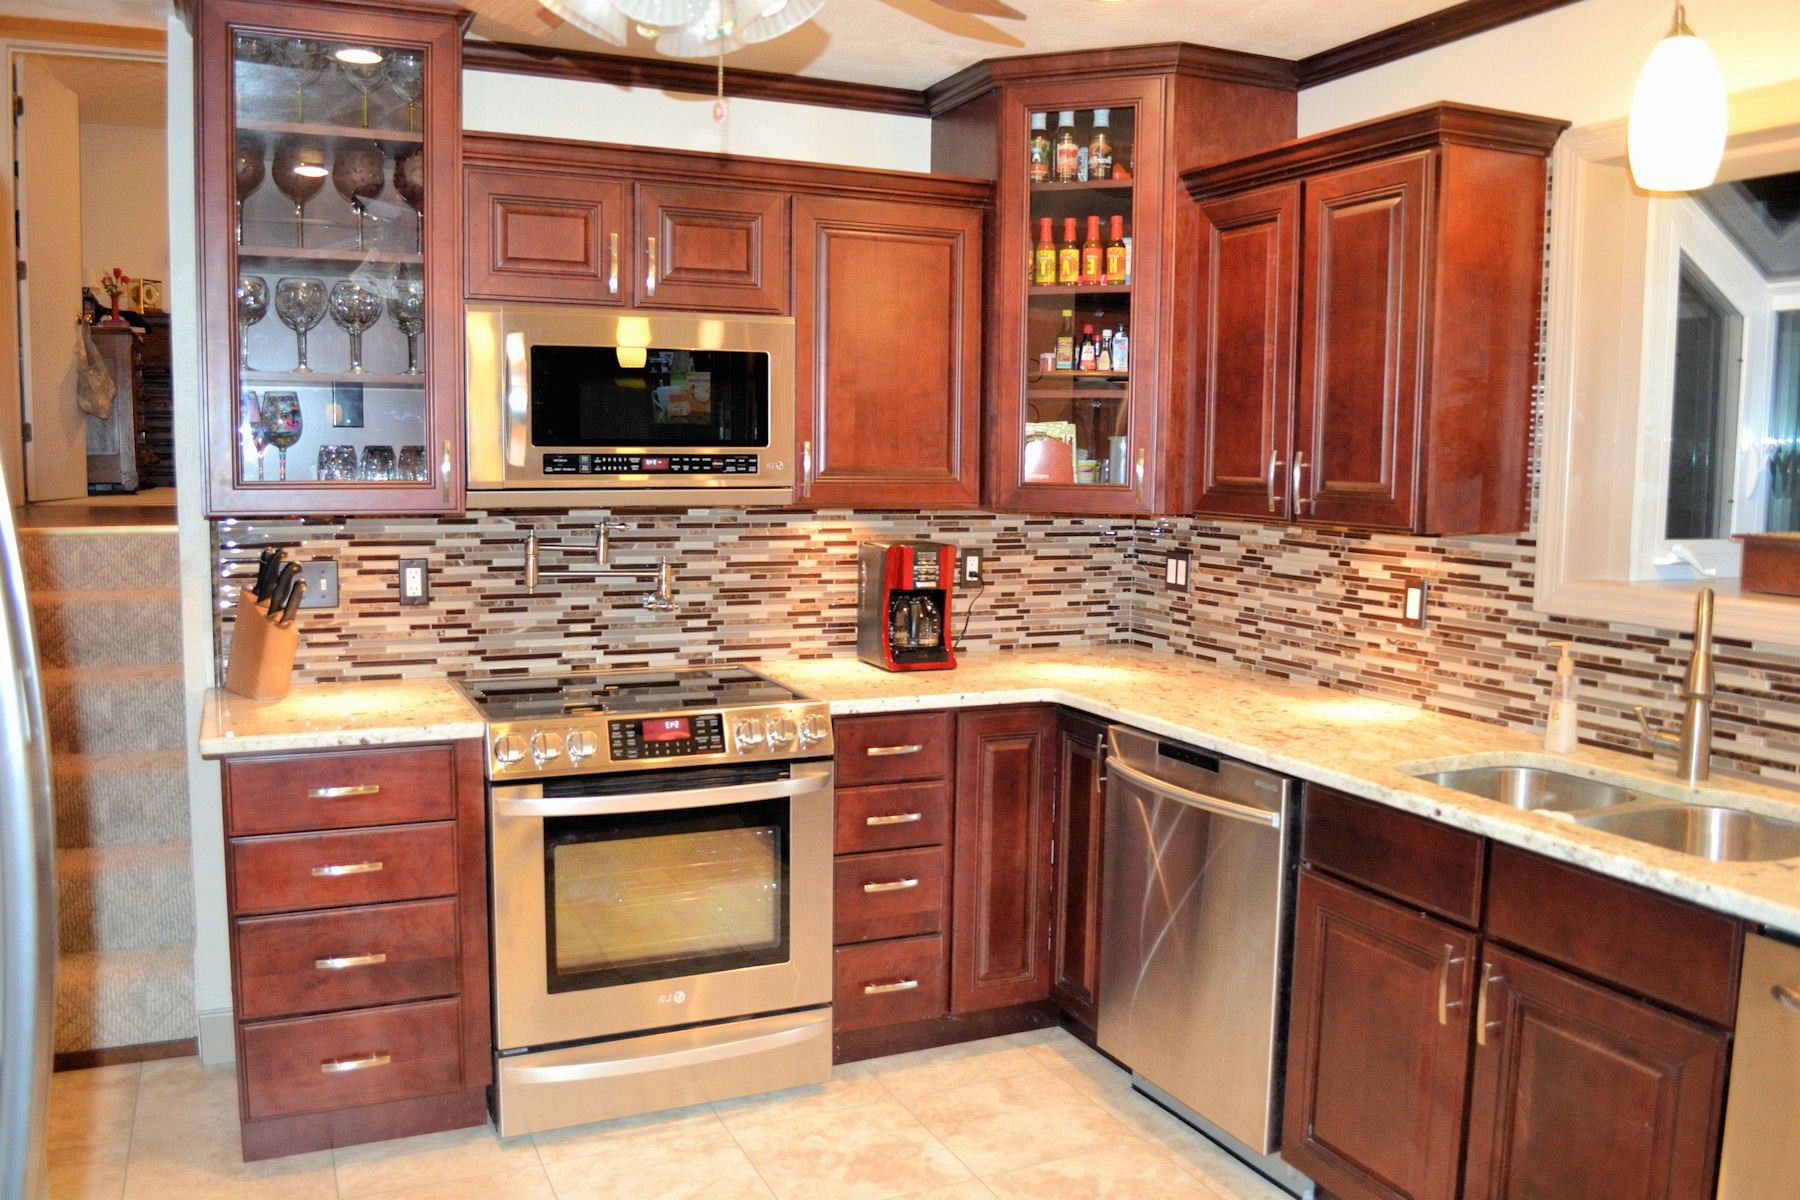 kitchen color schemes with cherry cabinets best kitchen color with cherry cabinets KBHZBMS